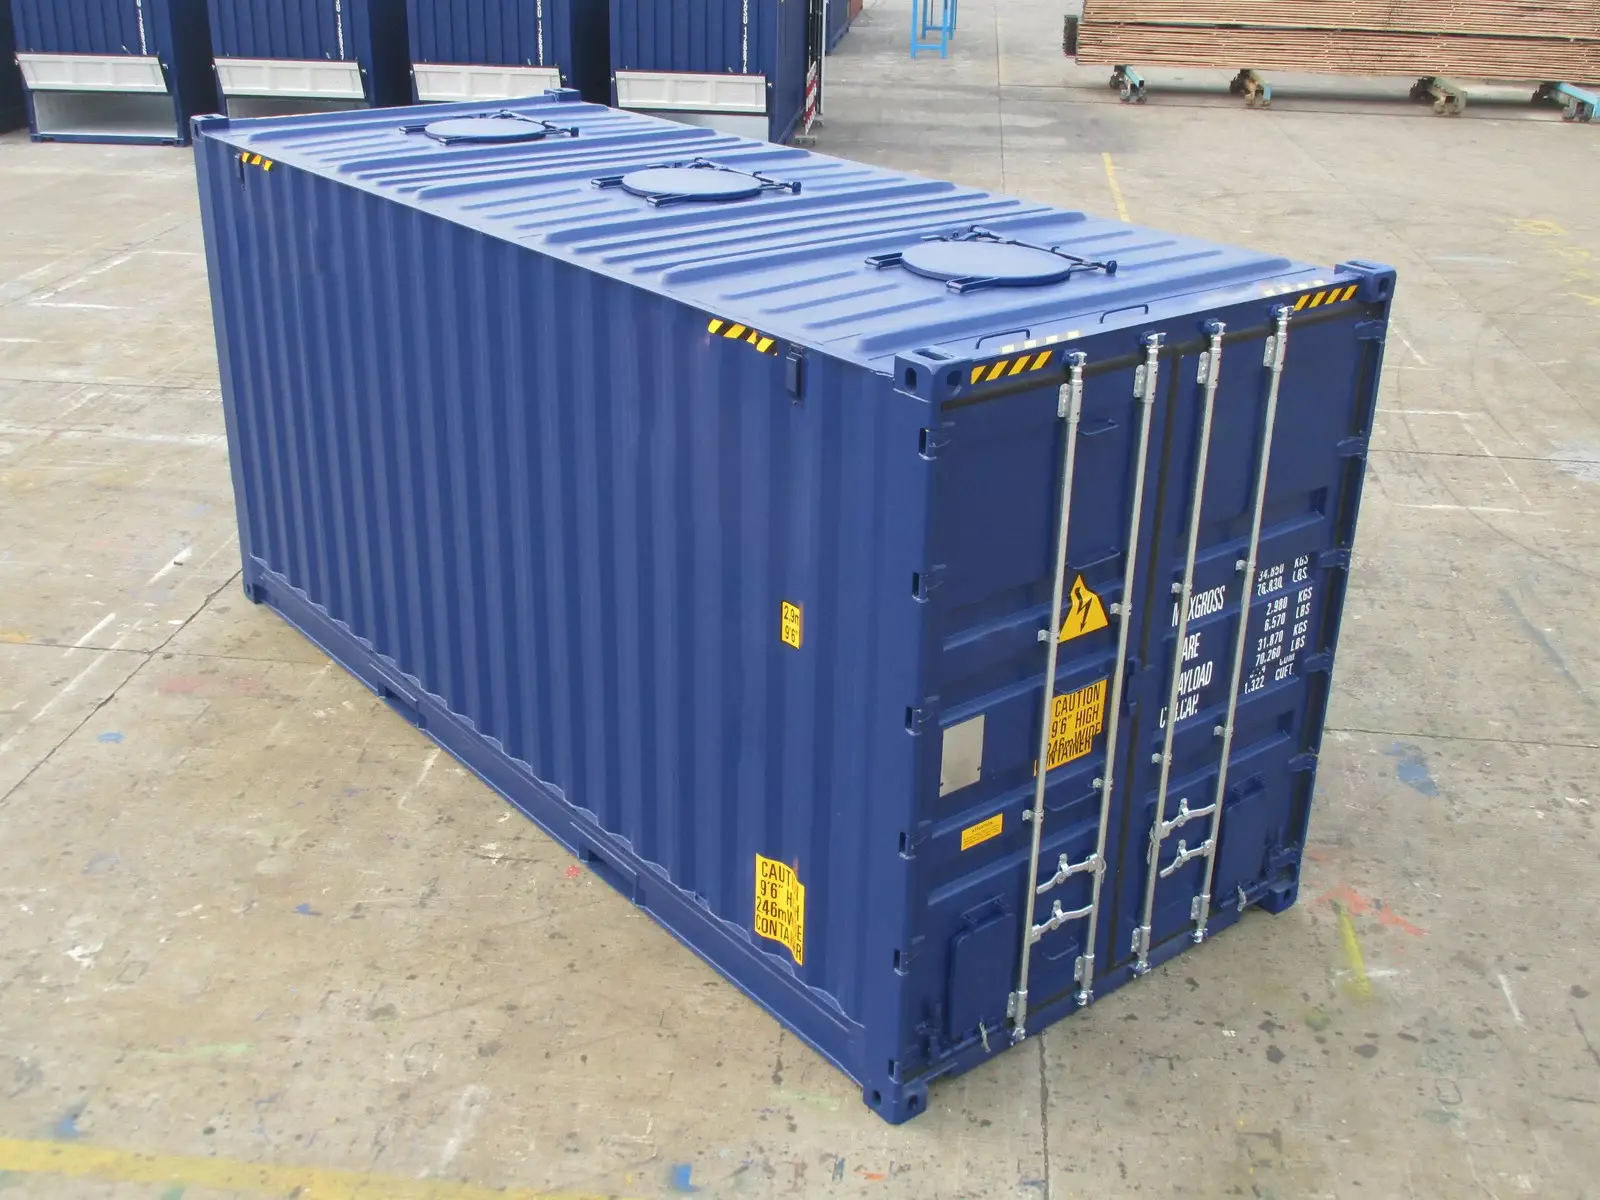 45ft shipping container for sale in Davie